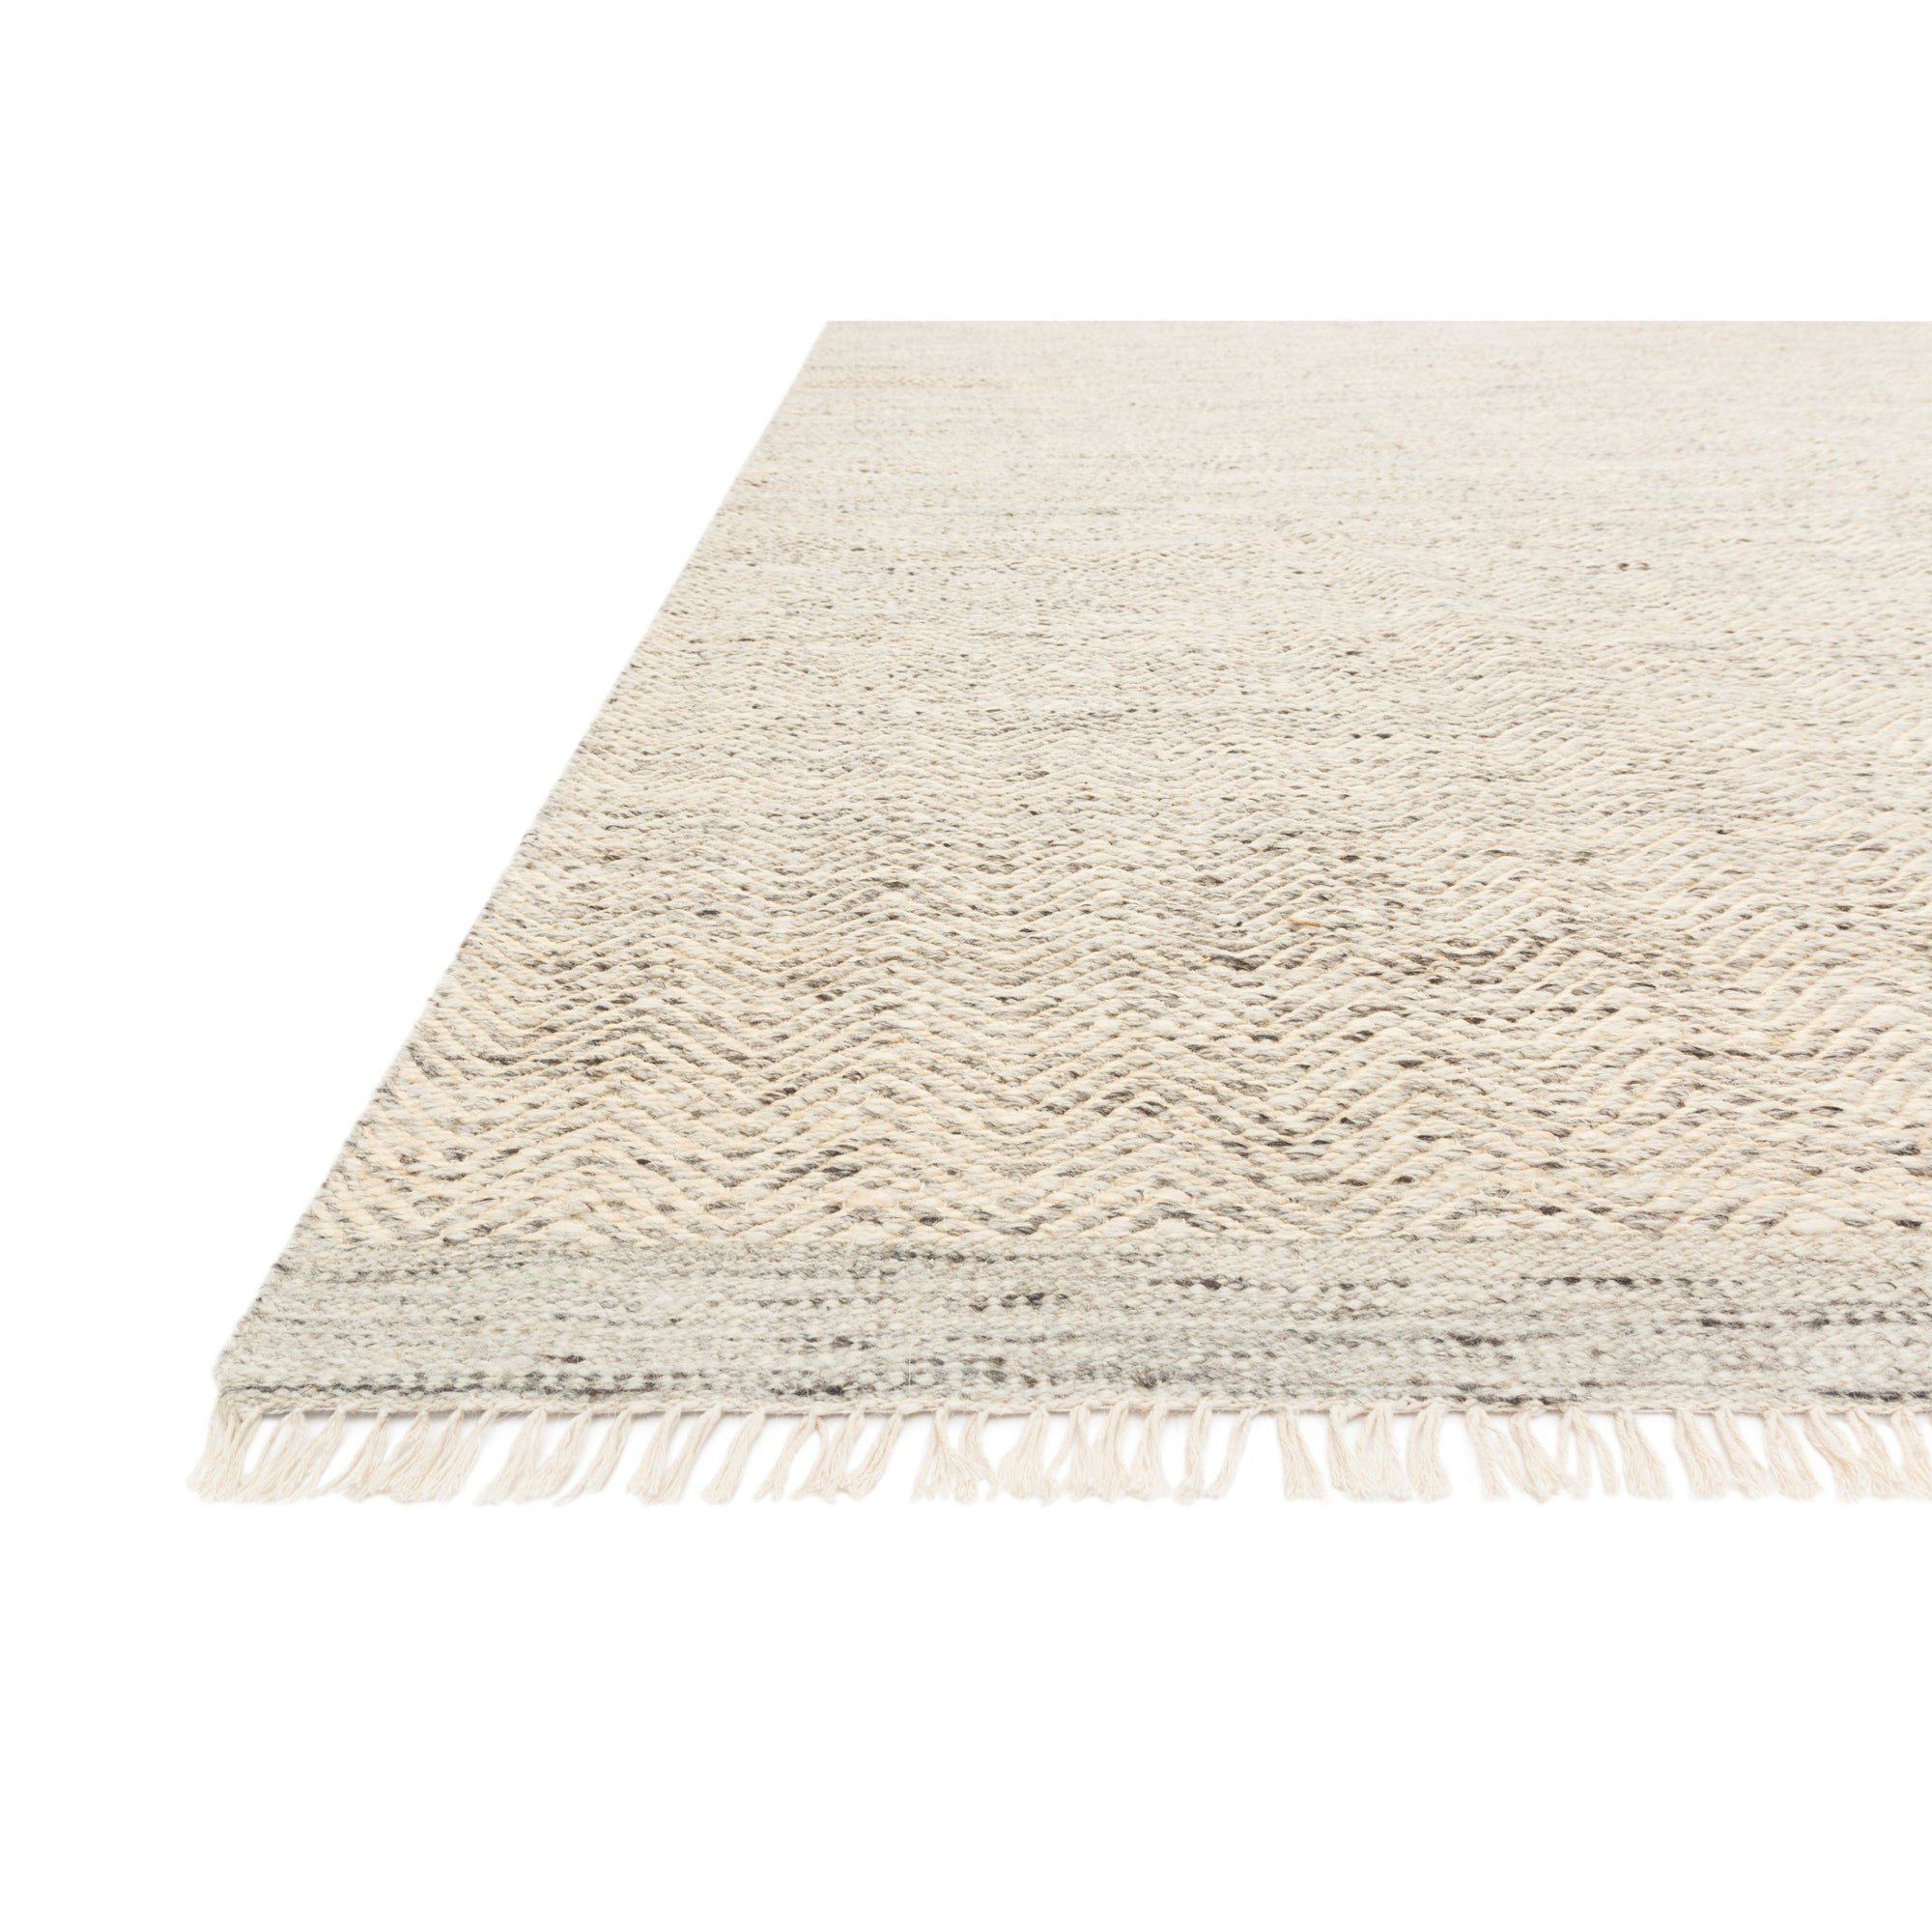 Rugs by Roo Loloi Omen Mist Area Rug in size 3' 6" x 5' 6"